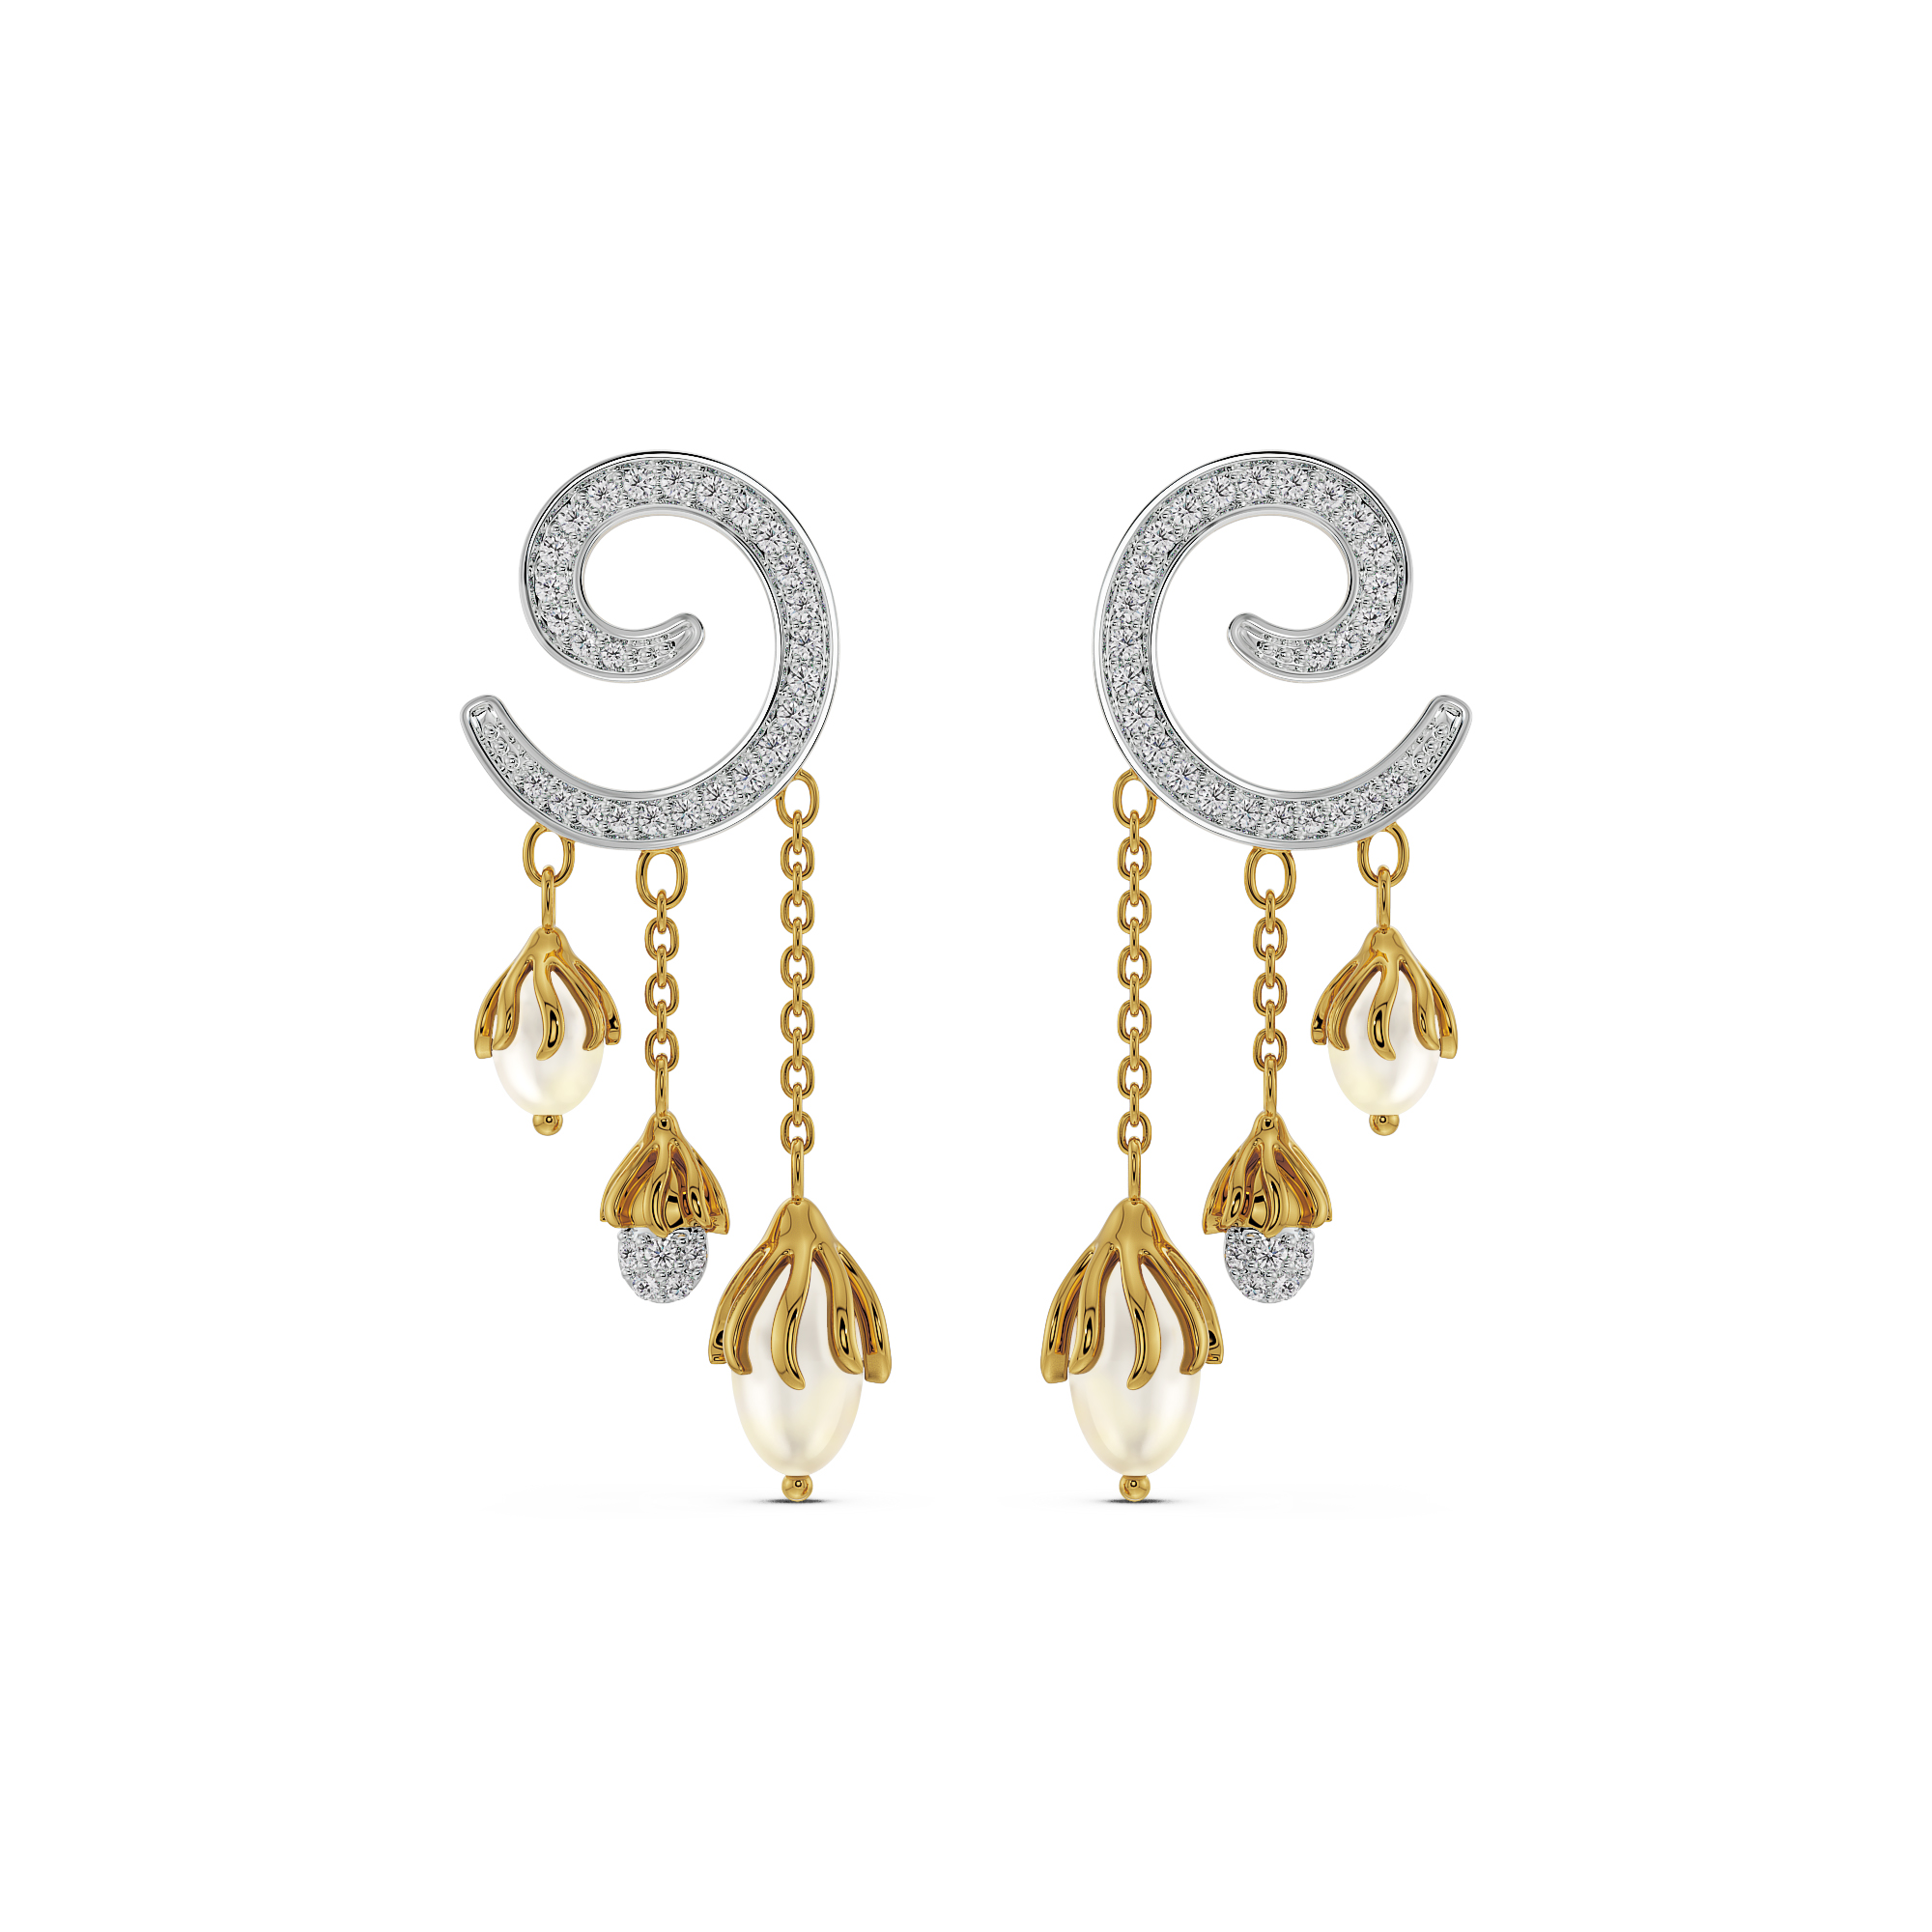 Buy Jaz Design House's Graceful and Stylish Diamond/Crystal Stone  Traditional Peacock Earrings for Women and Girls at Amazon.in